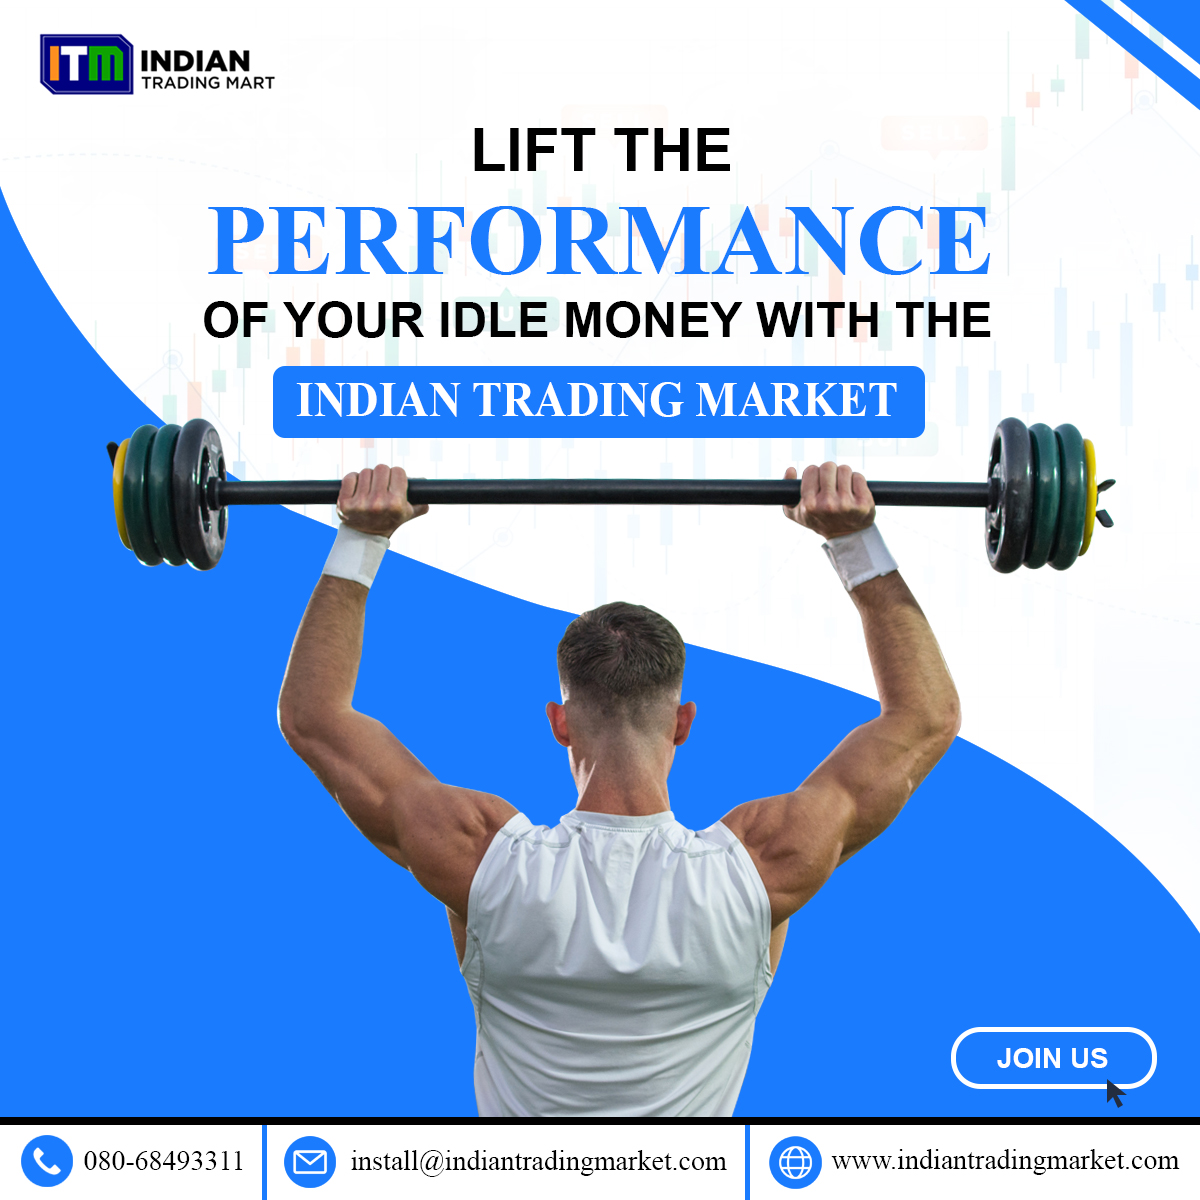 Explore diverse investment options and elevate your financial strategy today. Don't let your money sit idle - let it thrive in the dynamic world of trading!
Website: indiantradingmarket.com
Please email us at: install@indiantradingmarket.com
#AutomatedTrading #ManualTrading